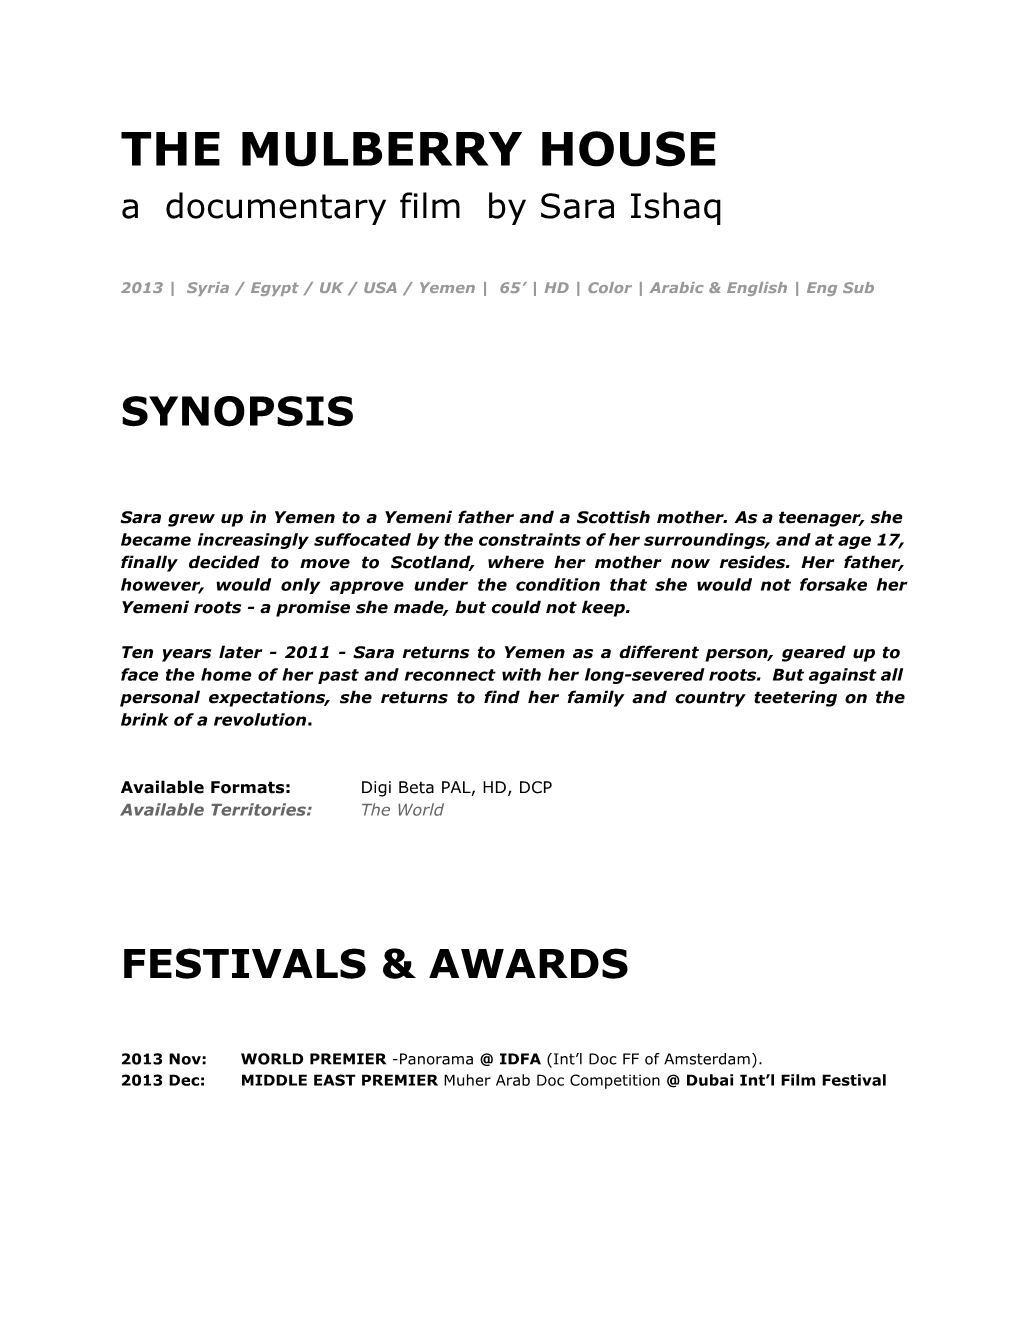 THE MULBERRY HOUSE a Documentary Film by Sara Ishaq